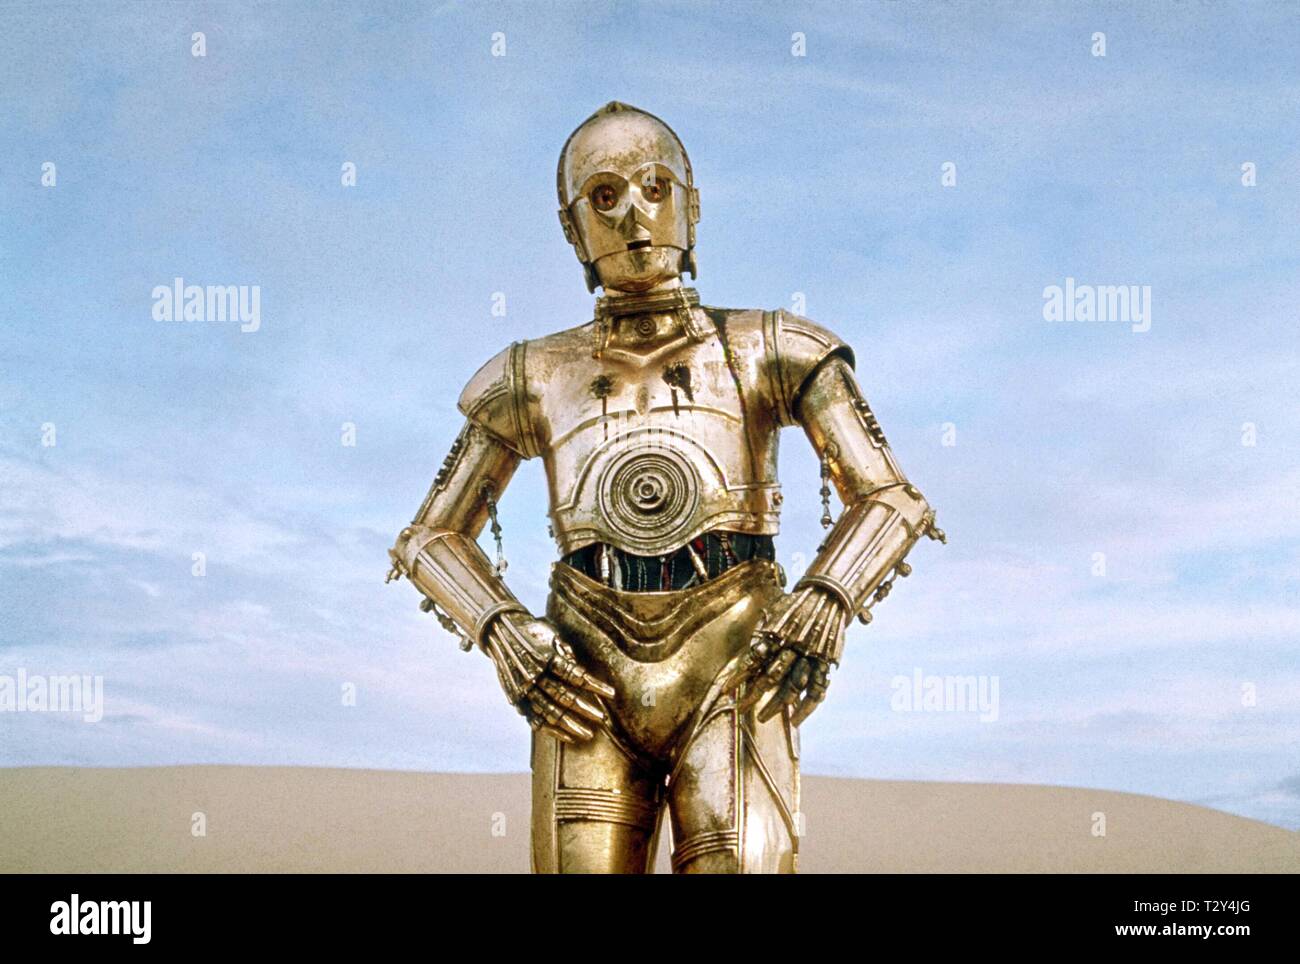 ANTHONY DANIELS, STAR WARS: EPISODE IV - A NEW HOPE, 1977 Stock Photo